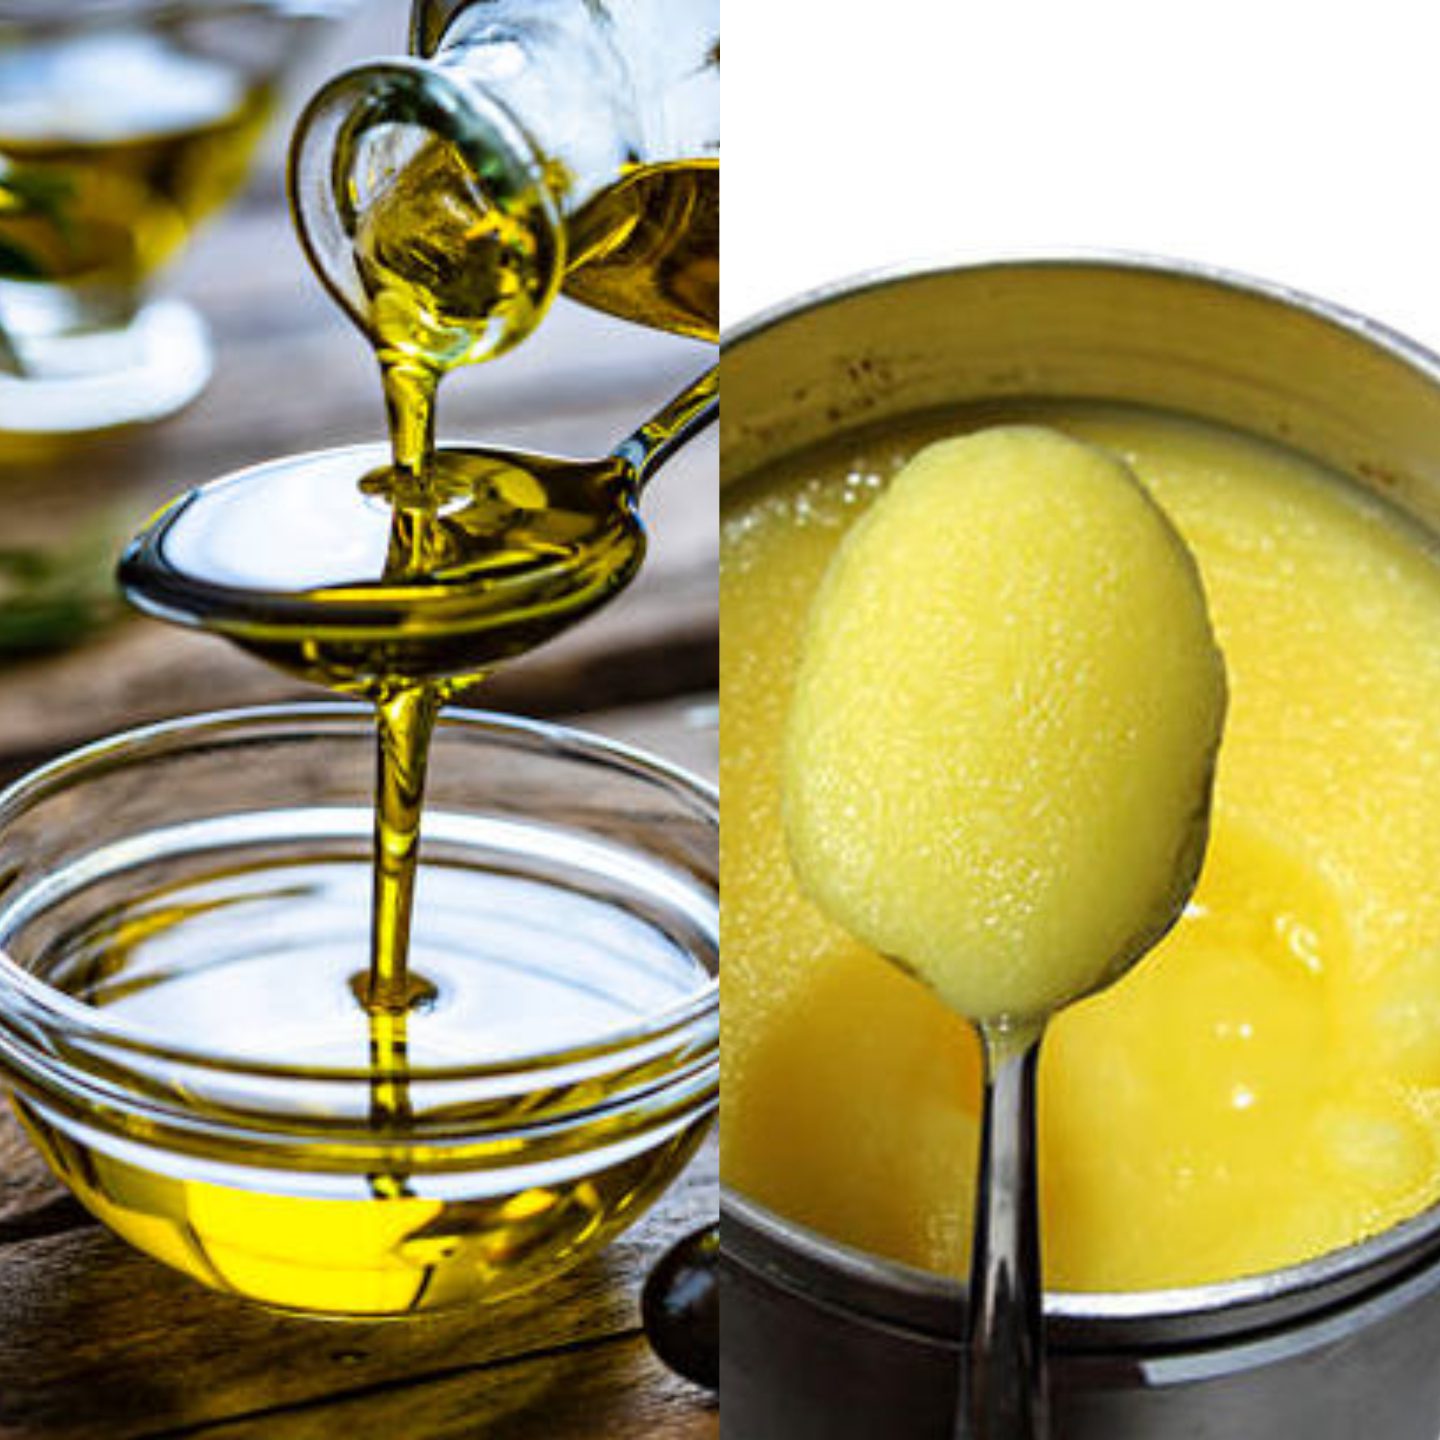 Olive Oil Or Desi Ghee? Which Is Best